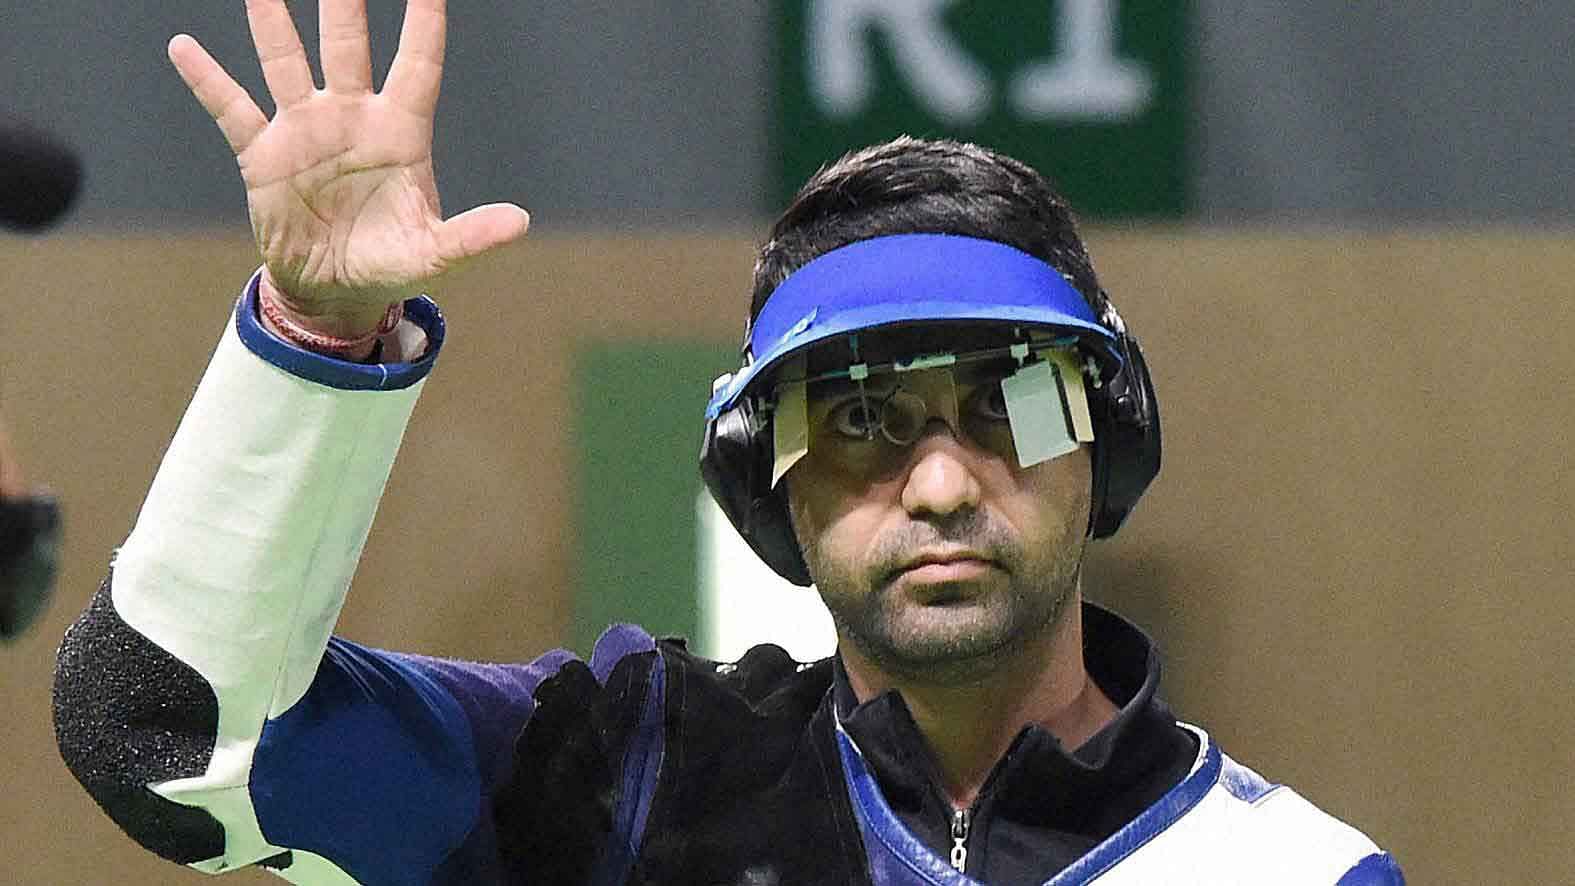 Abhinav Bindra finished fourth at the Rio Olympics, missing a medal in his final Games.(Photo: AP)